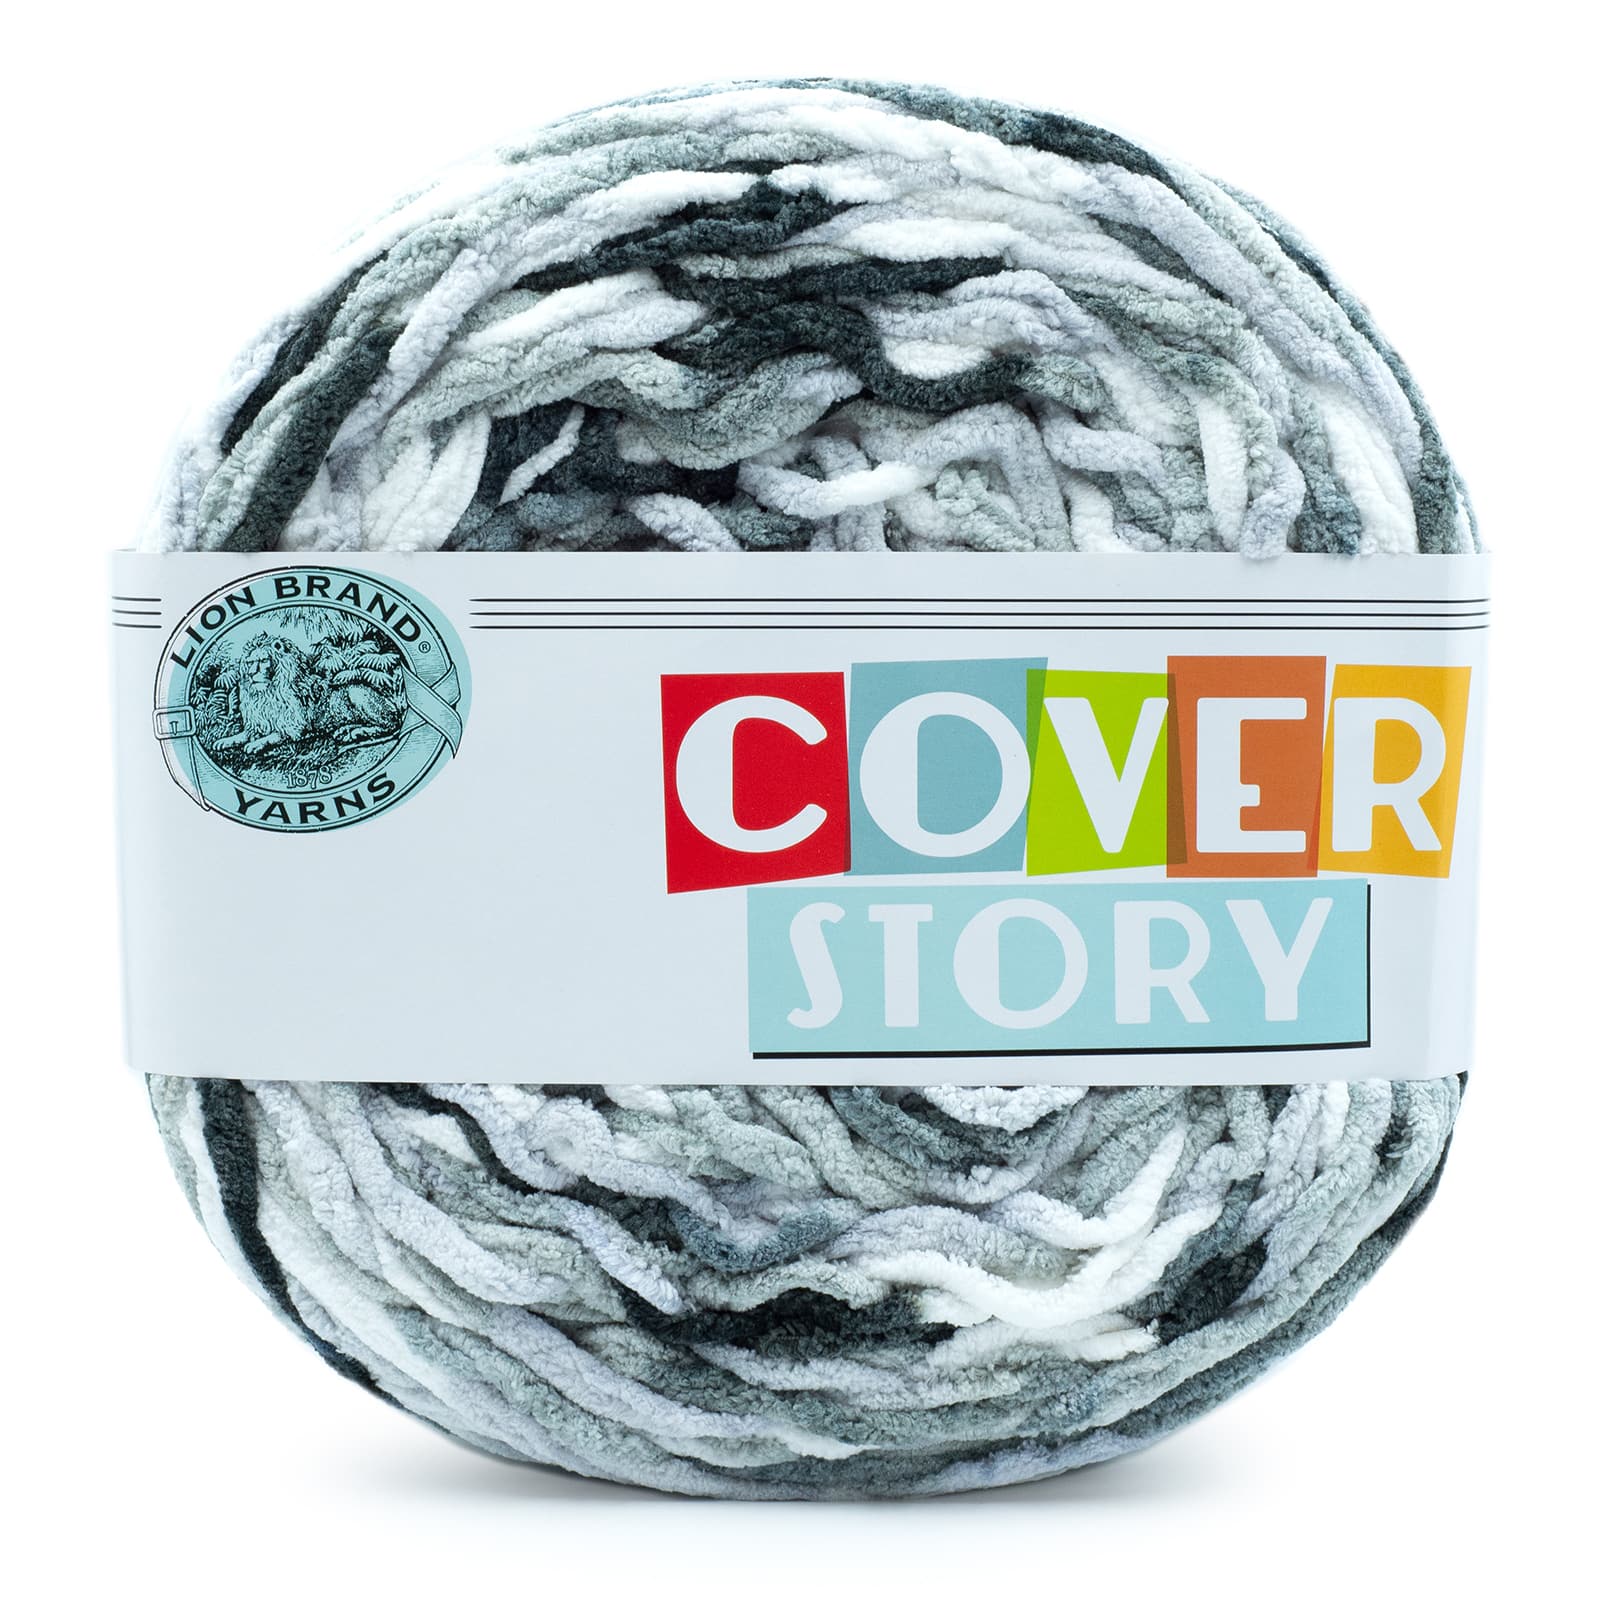 Lion BRAND Cover Story Yarn Cameo 023032063973 for sale